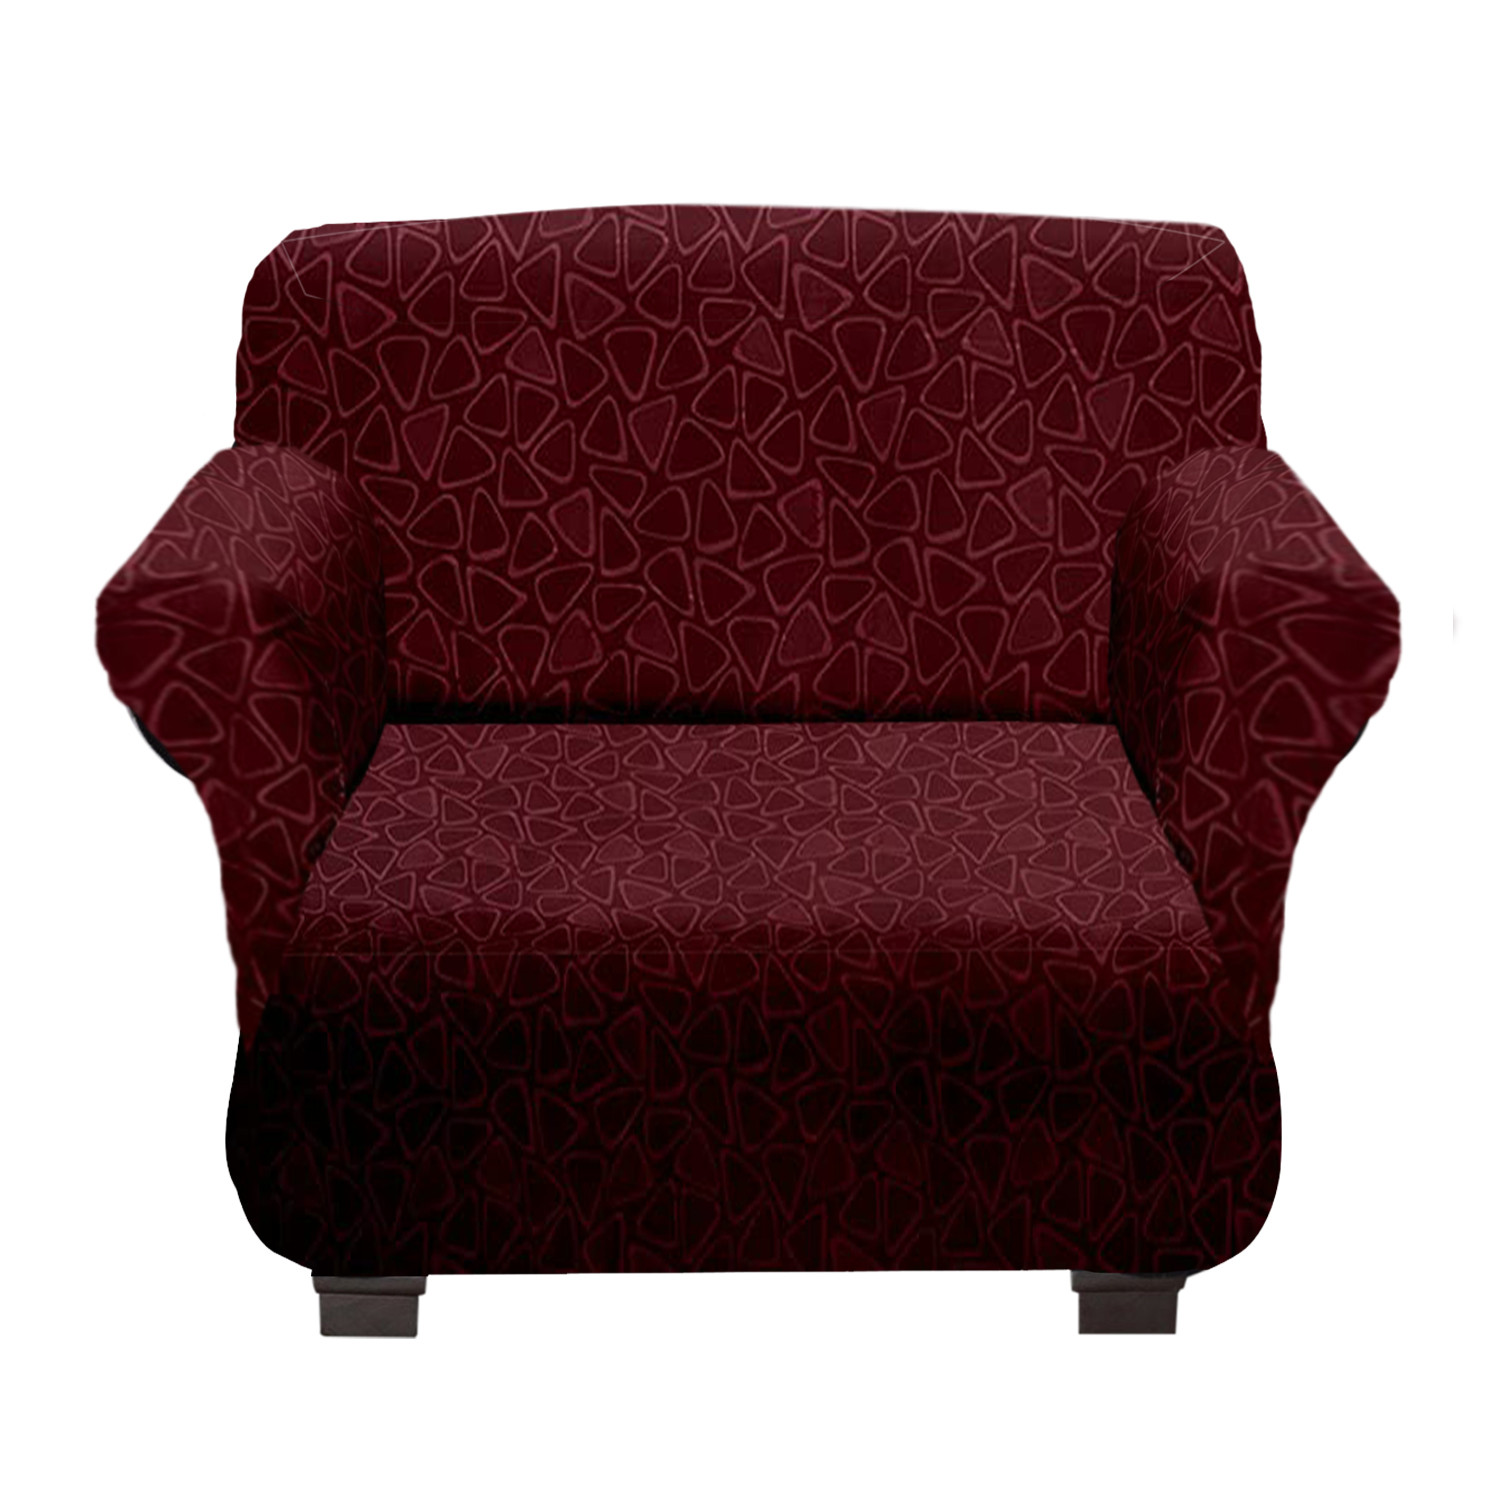 Kuber Industries Triangle Printed Stretchable, Non-Slip Polyster Single Seater Sofa Cover/Slipcover/Protector With Foam Stick (Maroon)